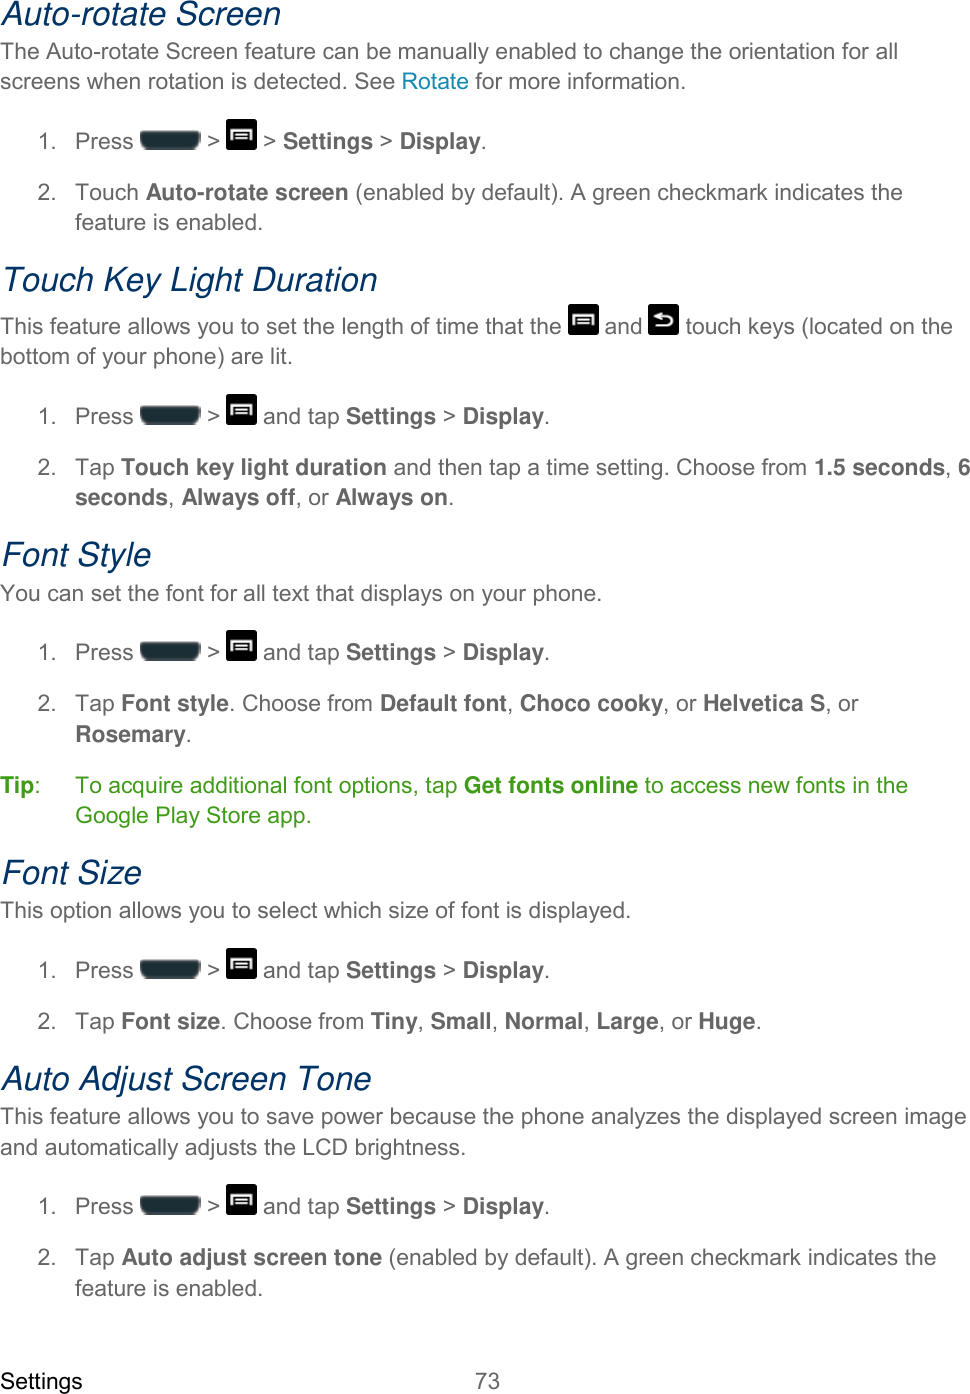 Settings 73   Auto-rotate Screen The Auto-rotate Screen feature can be manually enabled to change the orientation for all screens when rotation is detected. See Rotate for more information. 1.  Press   &gt;   &gt; Settings &gt; Display.  2.  Touch Auto-rotate screen (enabled by default). A green checkmark indicates the feature is enabled. Touch Key Light Duration This feature allows you to set the length of time that the   and   touch keys (located on the bottom of your phone) are lit. 1.  Press   &gt;   and tap Settings &gt; Display. 2.  Tap Touch key light duration and then tap a time setting. Choose from 1.5 seconds, 6 seconds, Always off, or Always on. Font Style You can set the font for all text that displays on your phone.  1.  Press   &gt;   and tap Settings &gt; Display. 2.  Tap Font style. Choose from Default font, Choco cooky, or Helvetica S, or Rosemary. Tip:   To acquire additional font options, tap Get fonts online to access new fonts in the Google Play Store app. Font Size This option allows you to select which size of font is displayed. 1.  Press   &gt;   and tap Settings &gt; Display. 2.  Tap Font size. Choose from Tiny, Small, Normal, Large, or Huge. Auto Adjust Screen Tone This feature allows you to save power because the phone analyzes the displayed screen image and automatically adjusts the LCD brightness. 1.  Press   &gt;   and tap Settings &gt; Display. 2.  Tap Auto adjust screen tone (enabled by default). A green checkmark indicates the feature is enabled. 